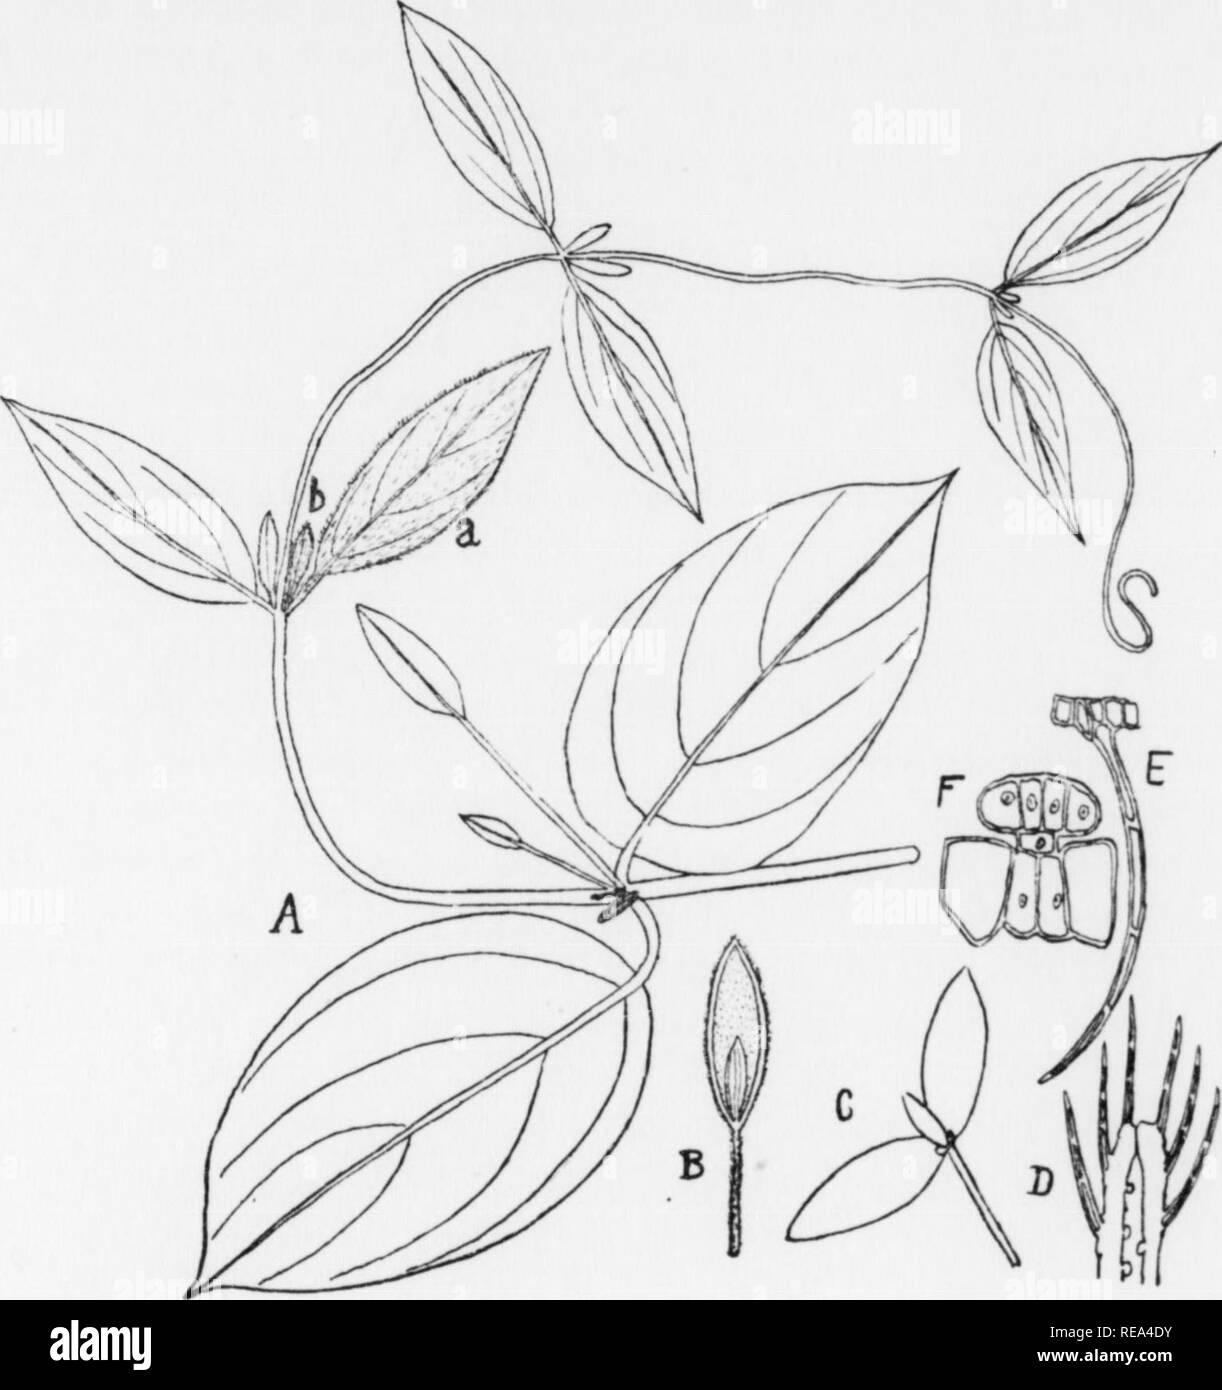 . Contributions from the Botanical Laboratory, vol. 7. Botany; Botany. The Water-Storing Bracts of Mendoncia coccinea Veil, of Brazil John W. Hakshukkcer Mendoncia is a genus of the family Acanthaceae, the twenty species of which are found in tropical America principally in Brazil, Guiana, Peru and an outlying species, M. costaricana Oerst. in Costa Rica. The plants of the genus are shrubs, or vines, usually well-provided with a hairy covering. The sim- ple leaves are opposite and the floral bracts are likewise with their e.lges adherent. Each pair of opposite bracts usually encloses a single  Stock Photo